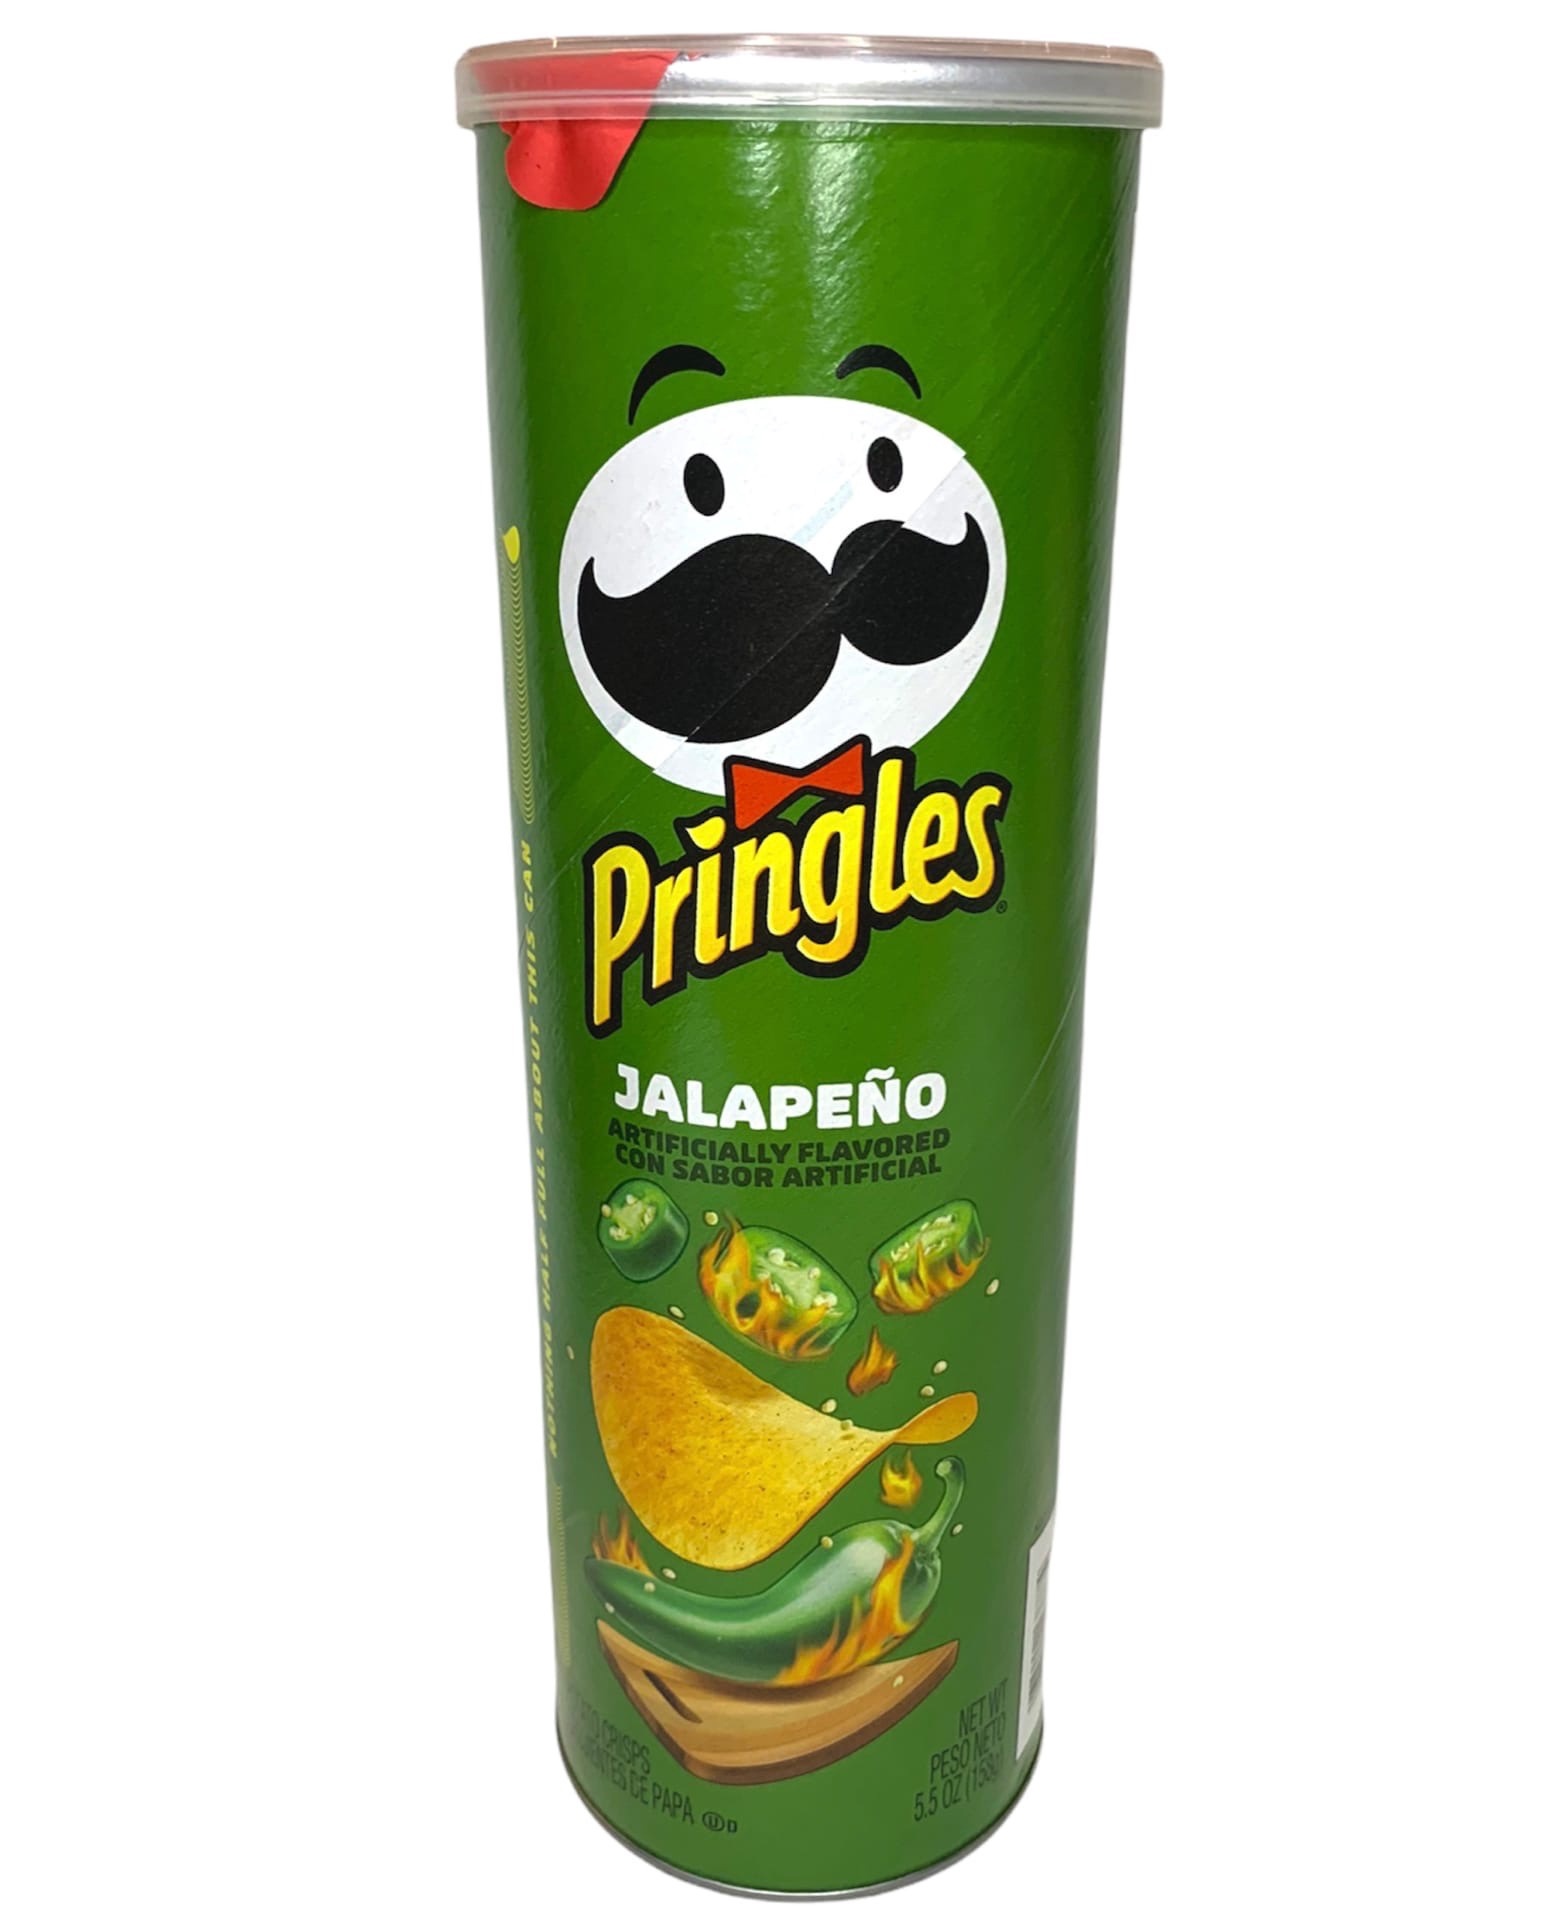 Pringles and sponges